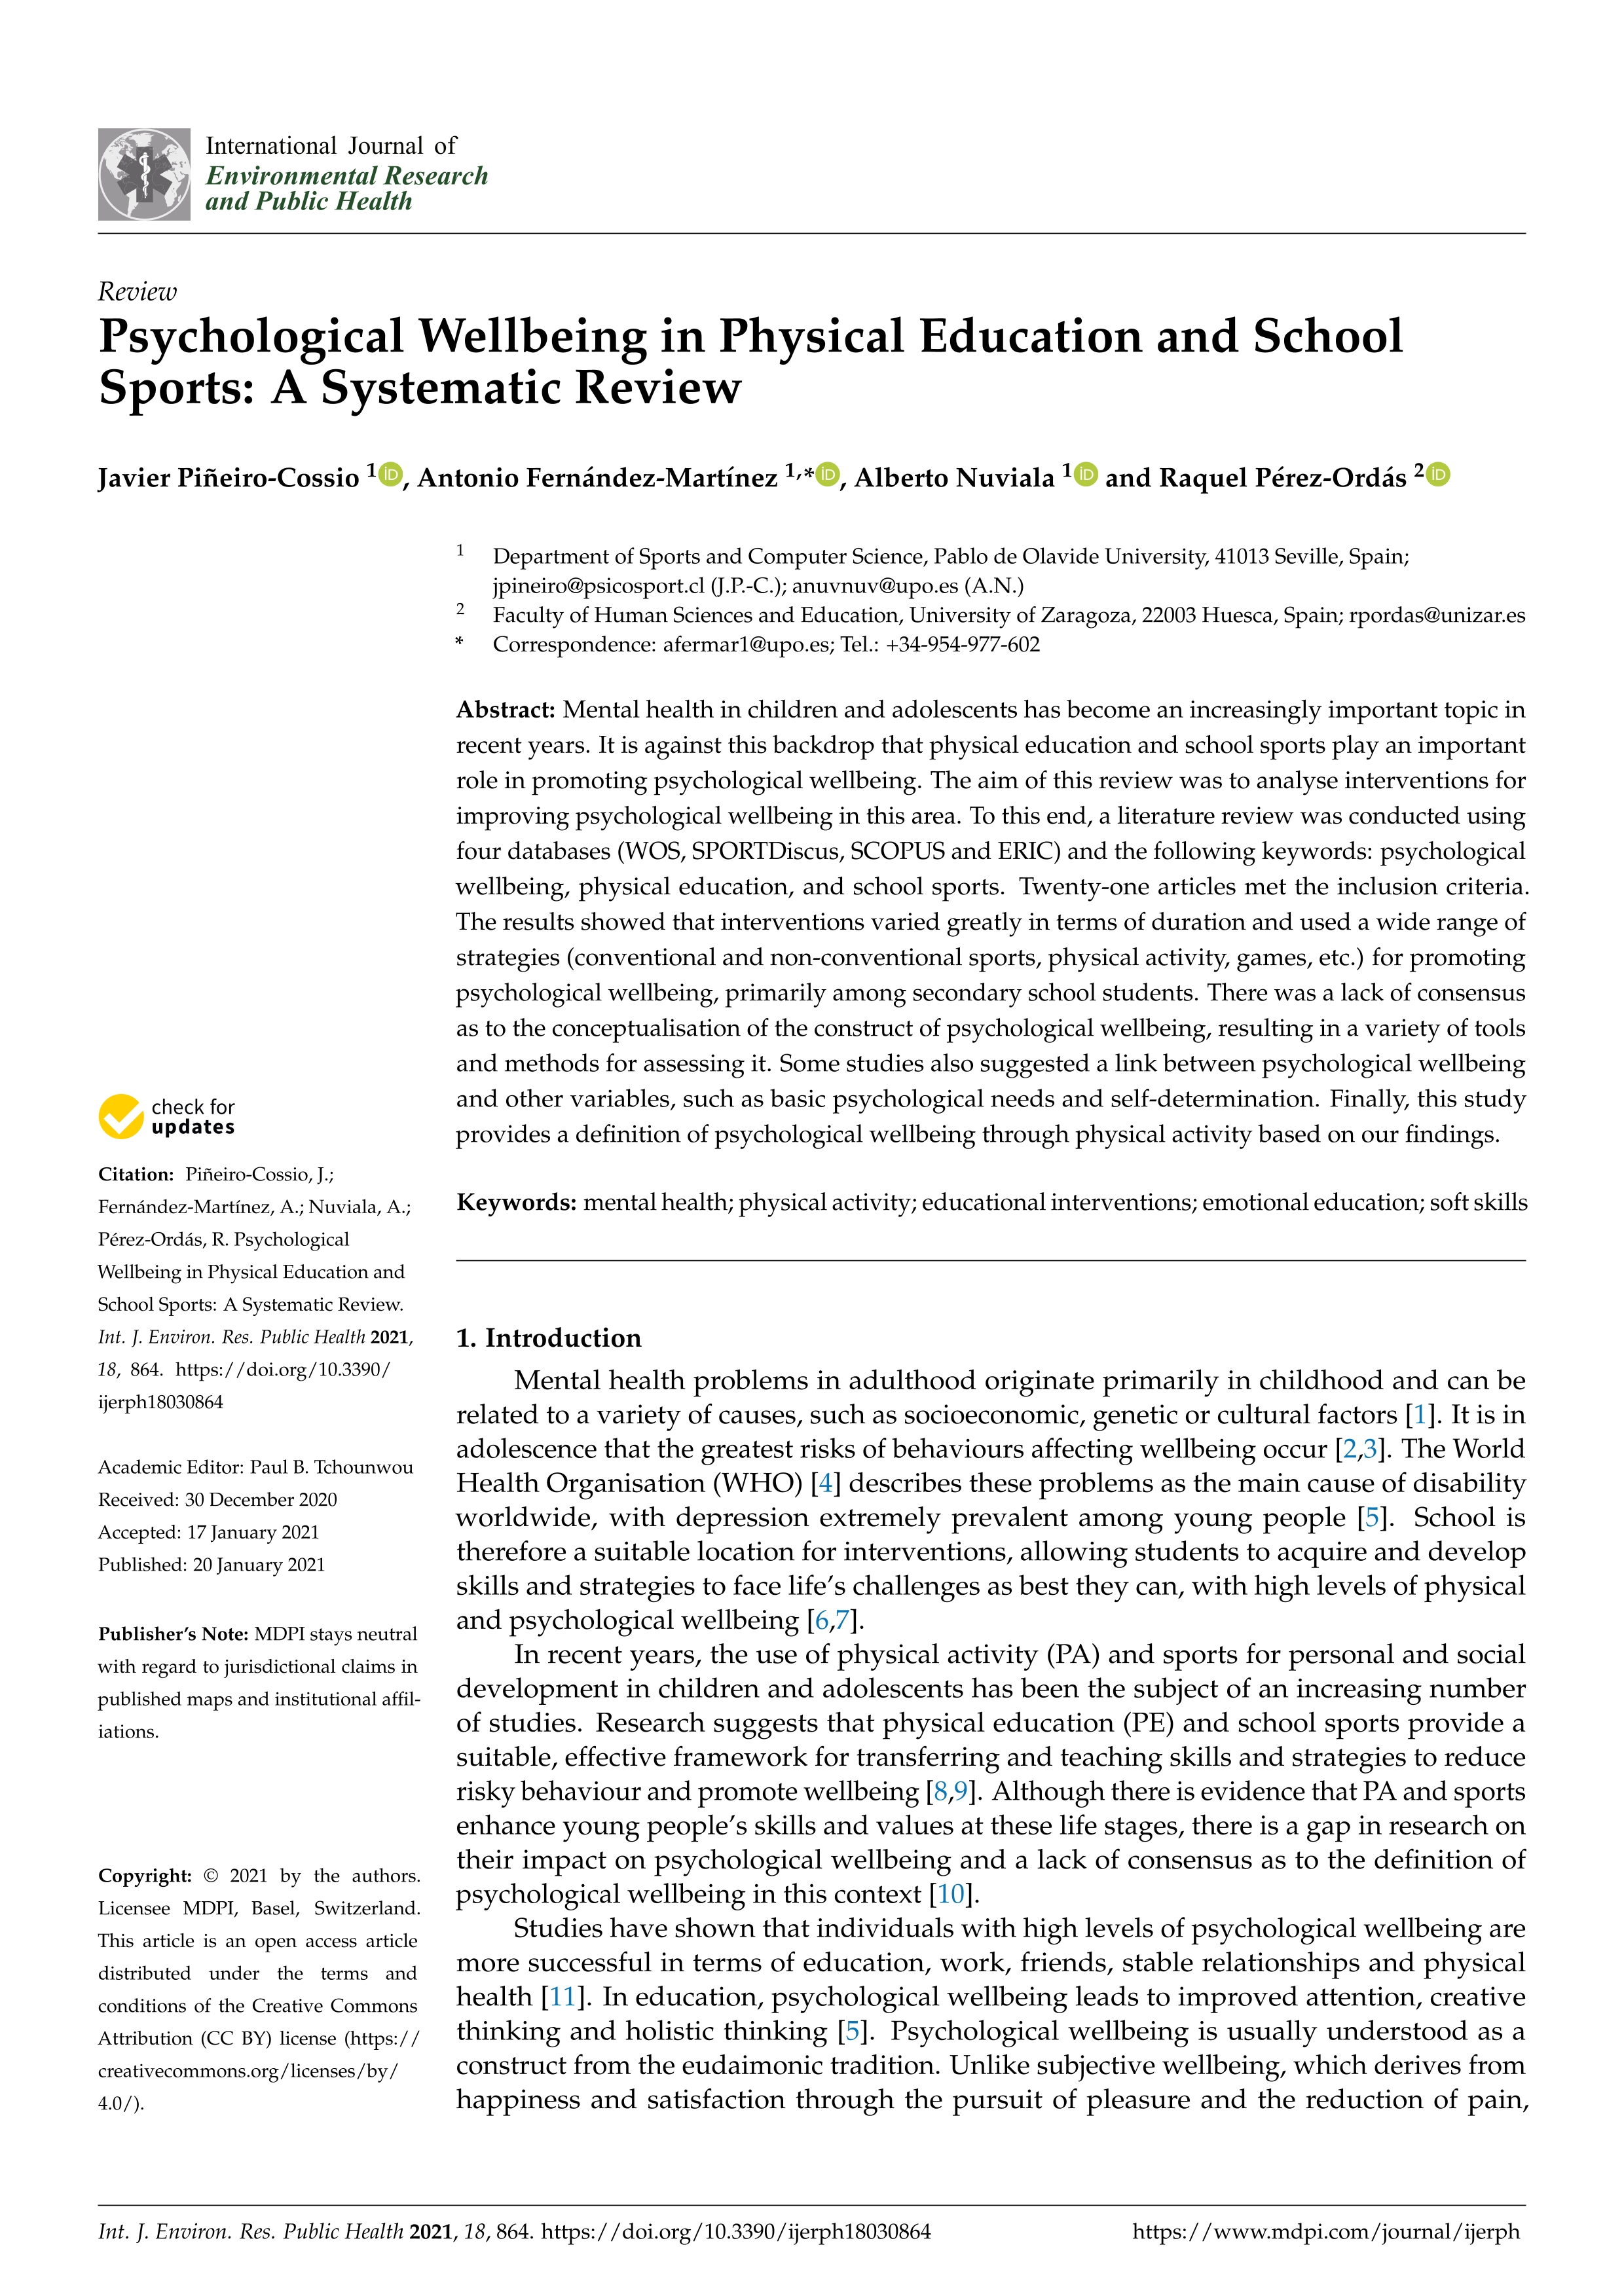 Psychological wellbeing in physical education and school sports: A systematic review